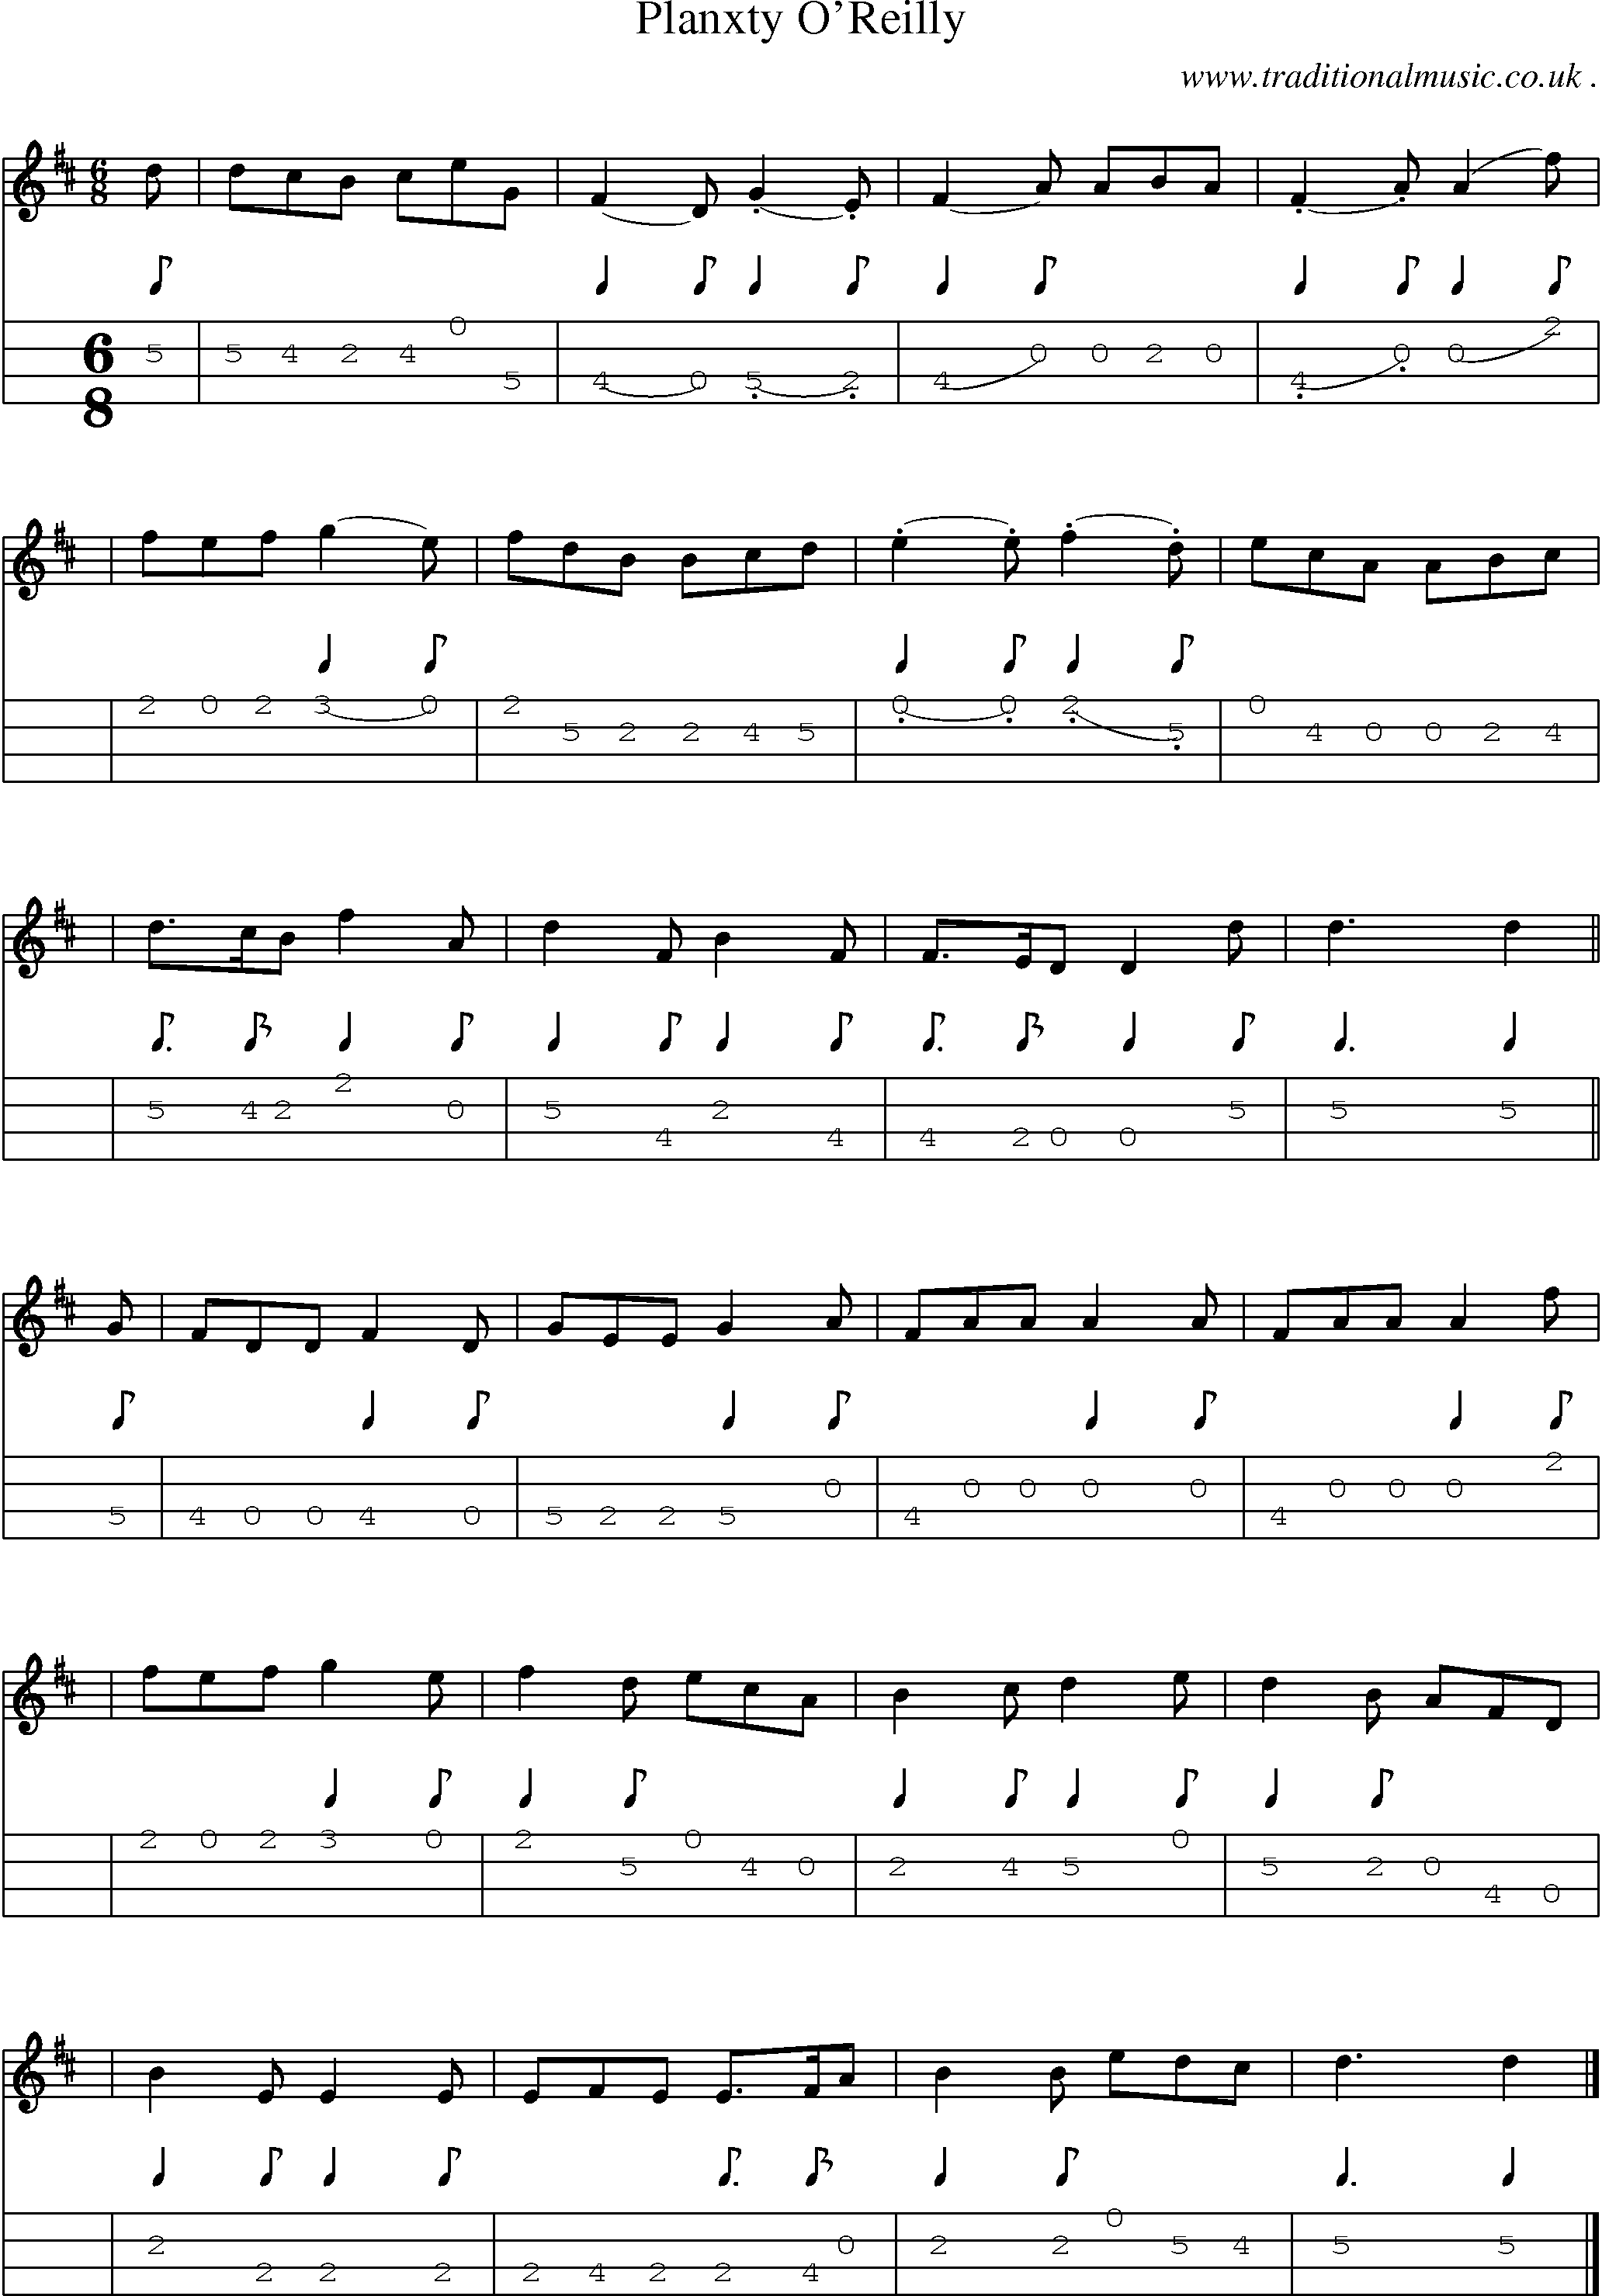 Sheet-music  score, Chords and Mandolin Tabs for Planxty Oreilly